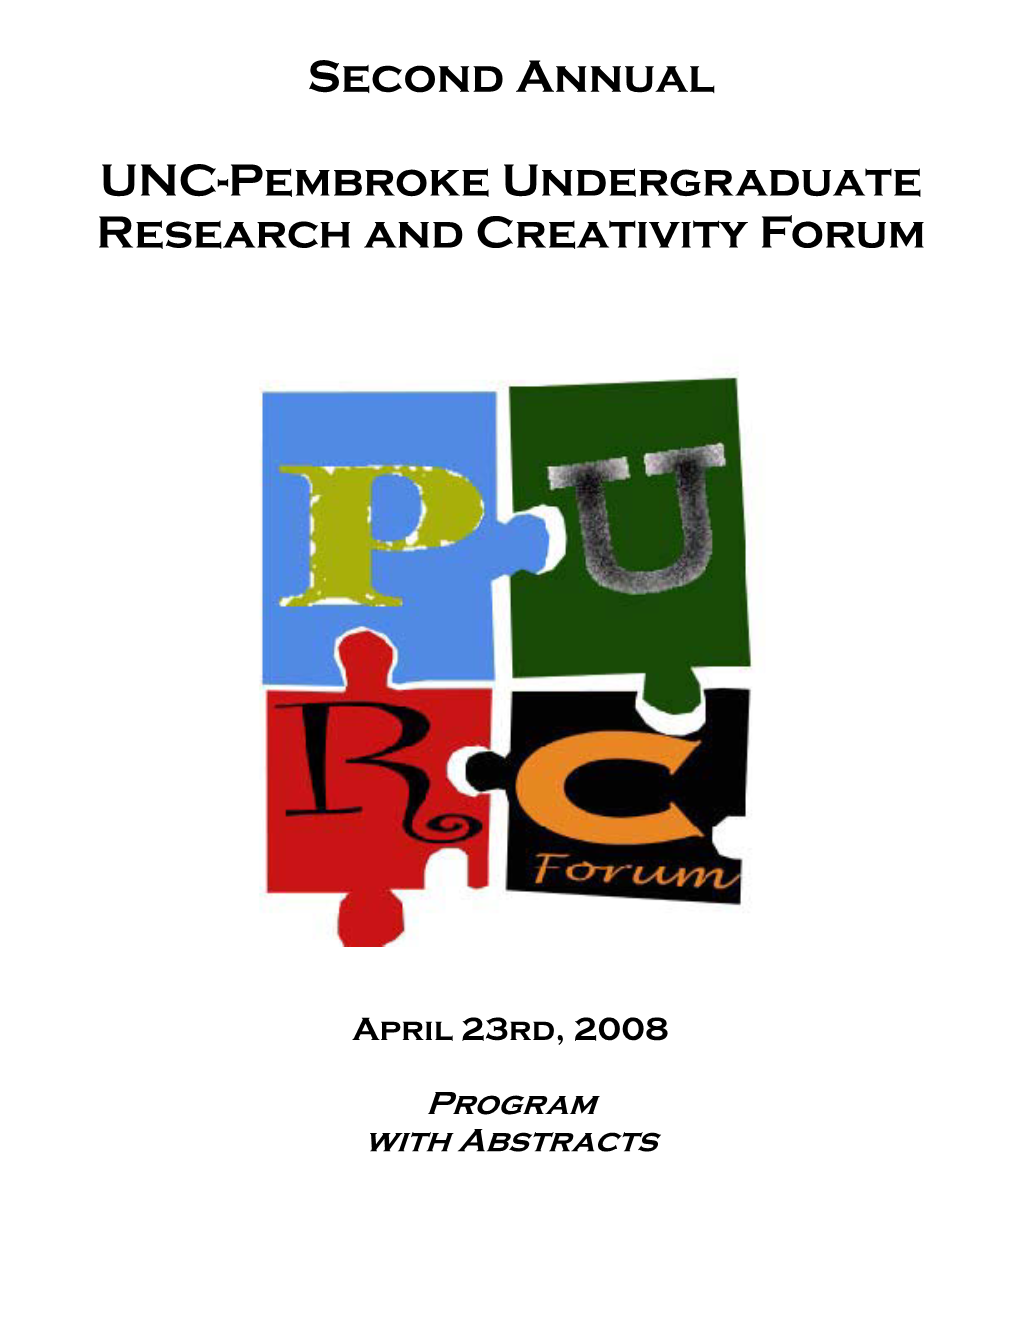 2008 PURC Forum Abstracts with Program